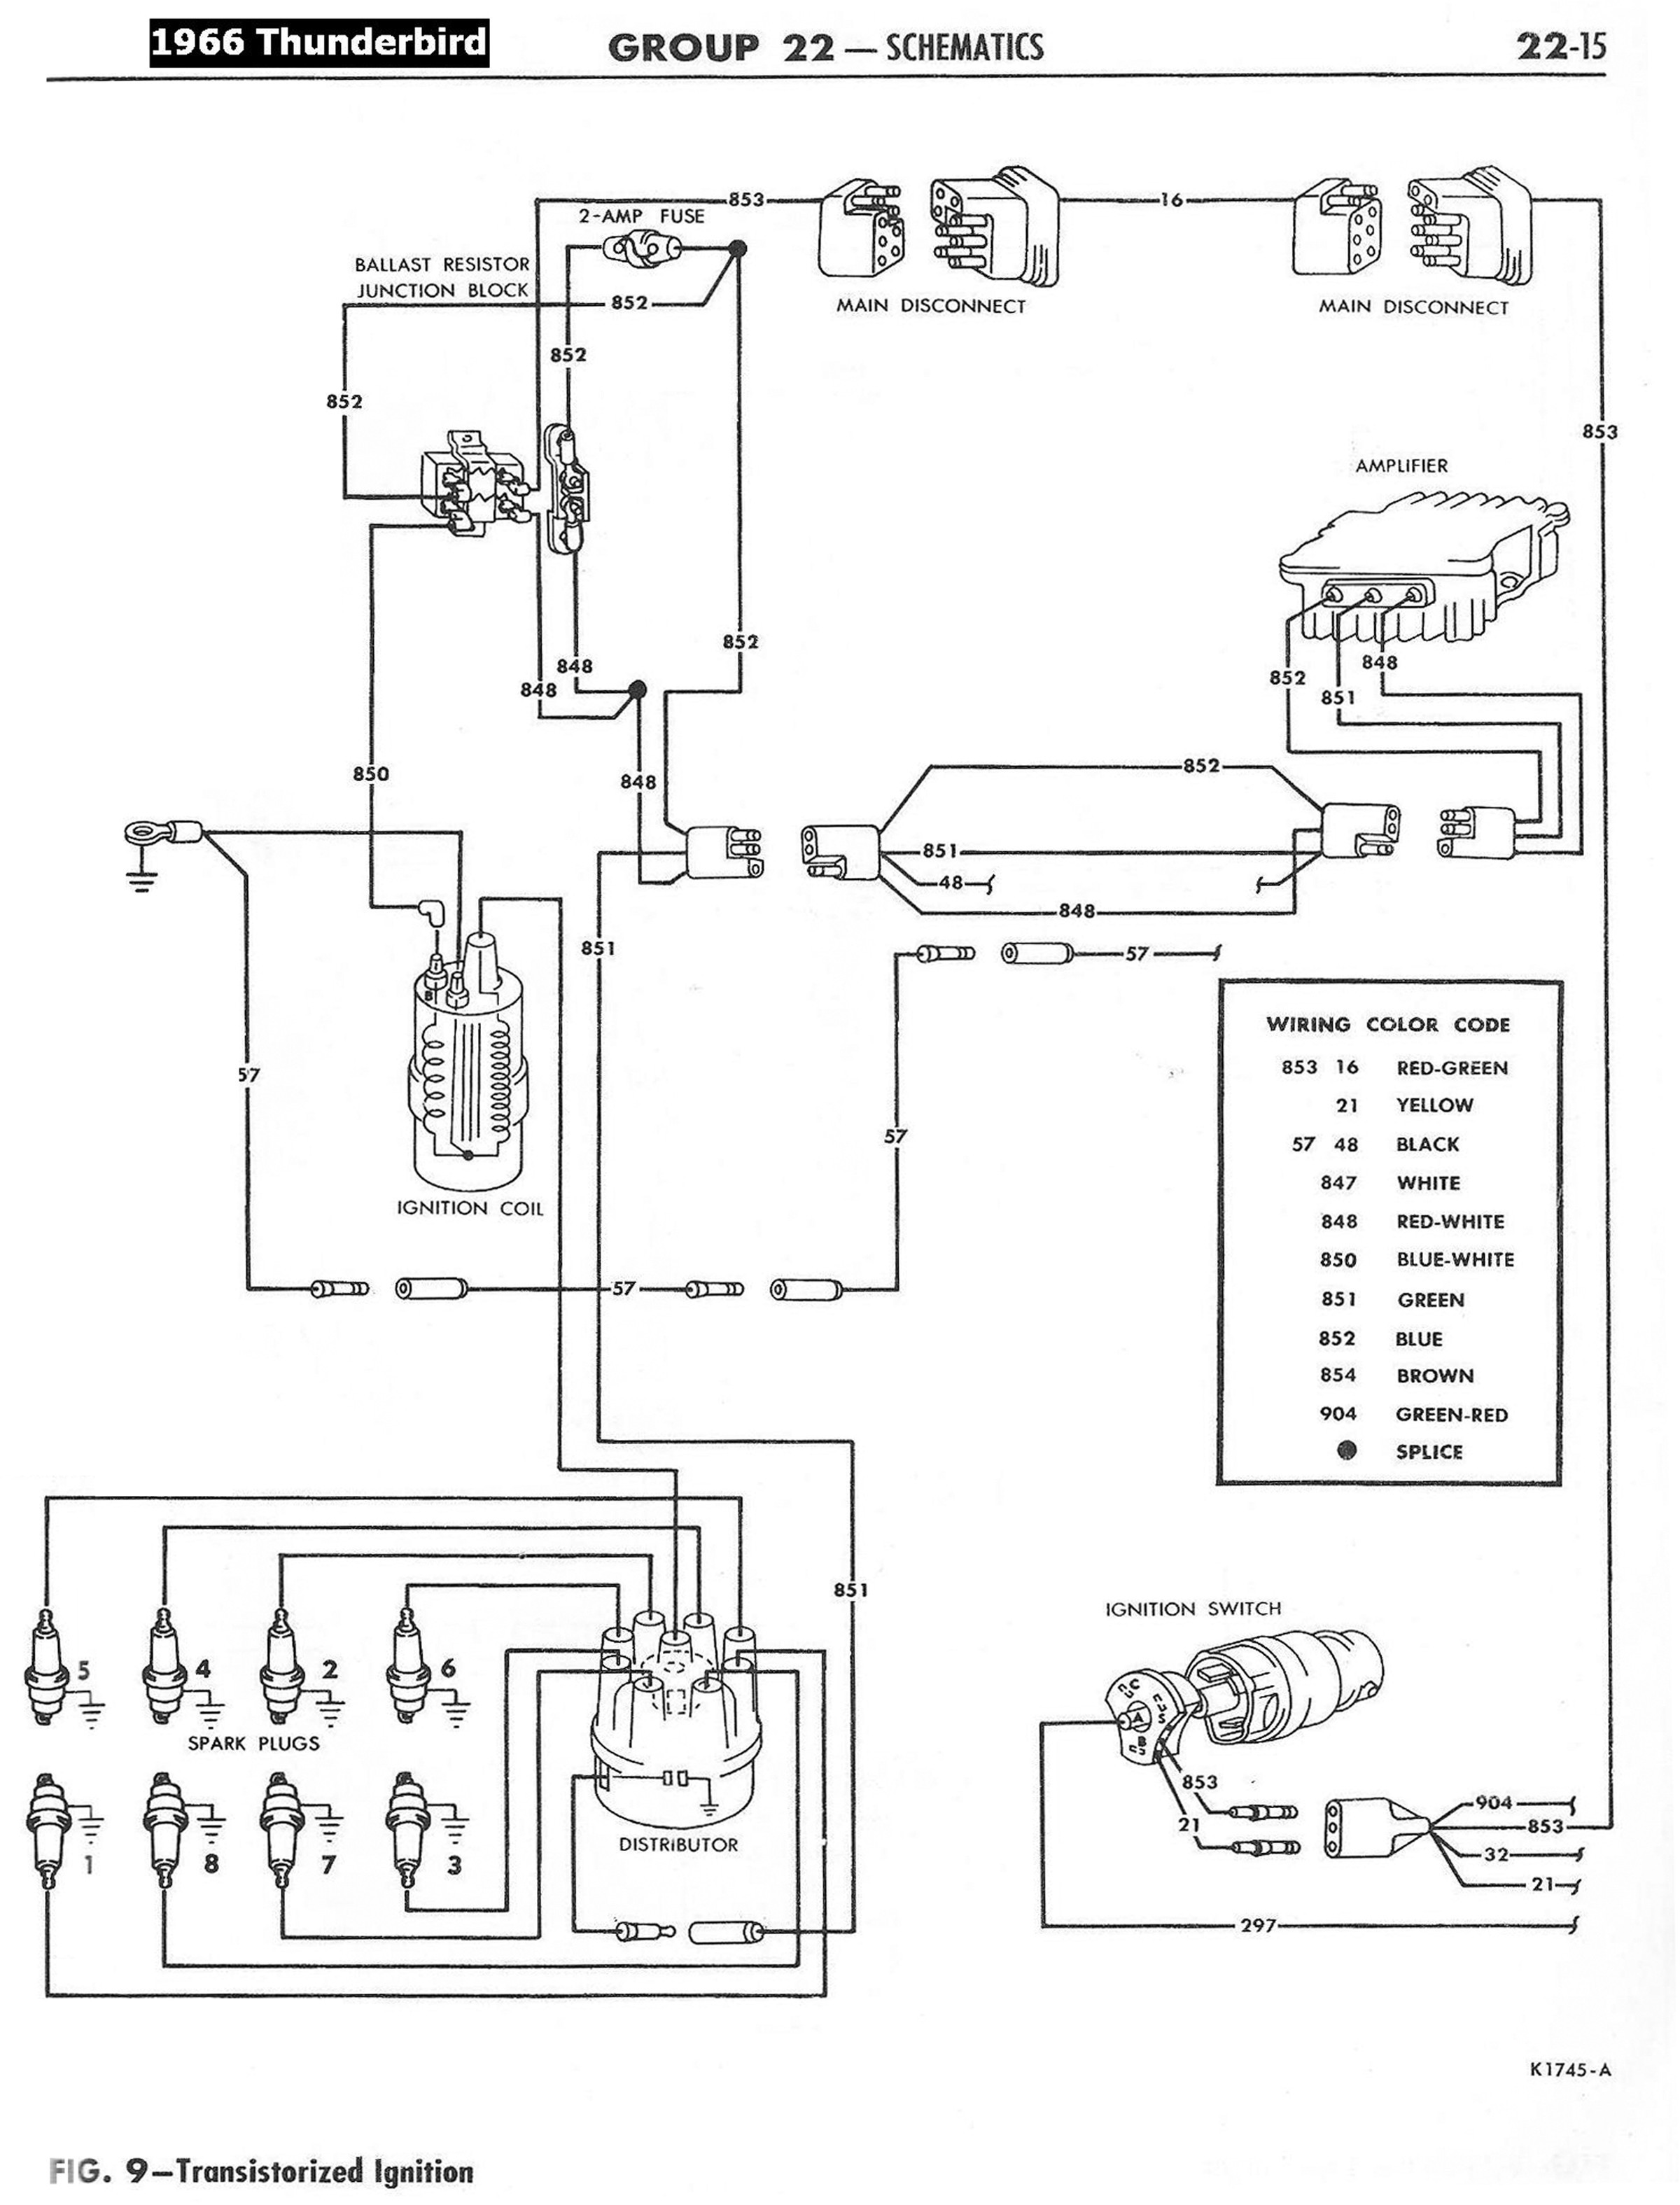 Msd Wiring Diagram Inspirational Msd Ignition Wiring Diagrams Brianesser and Pertronix Diagram Msd Wiring Diagram